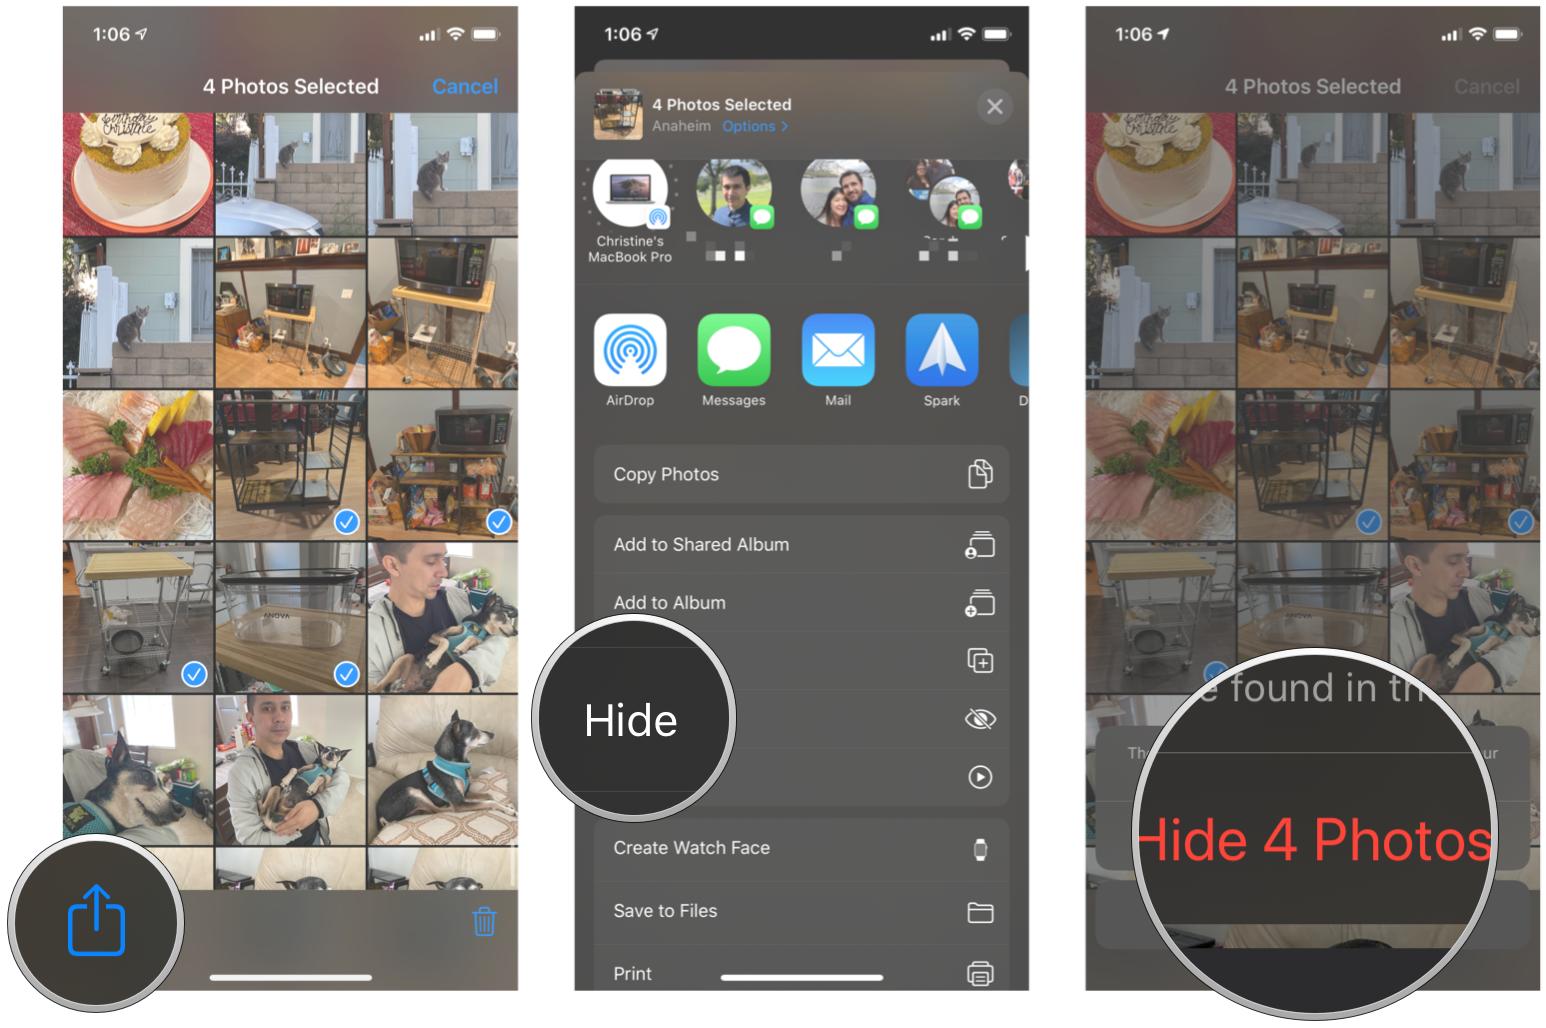 Hide photos and video in Photos on iPhone and iPad by showing steps: Select photos and video, tap Share, tap Hide, confirm to hide